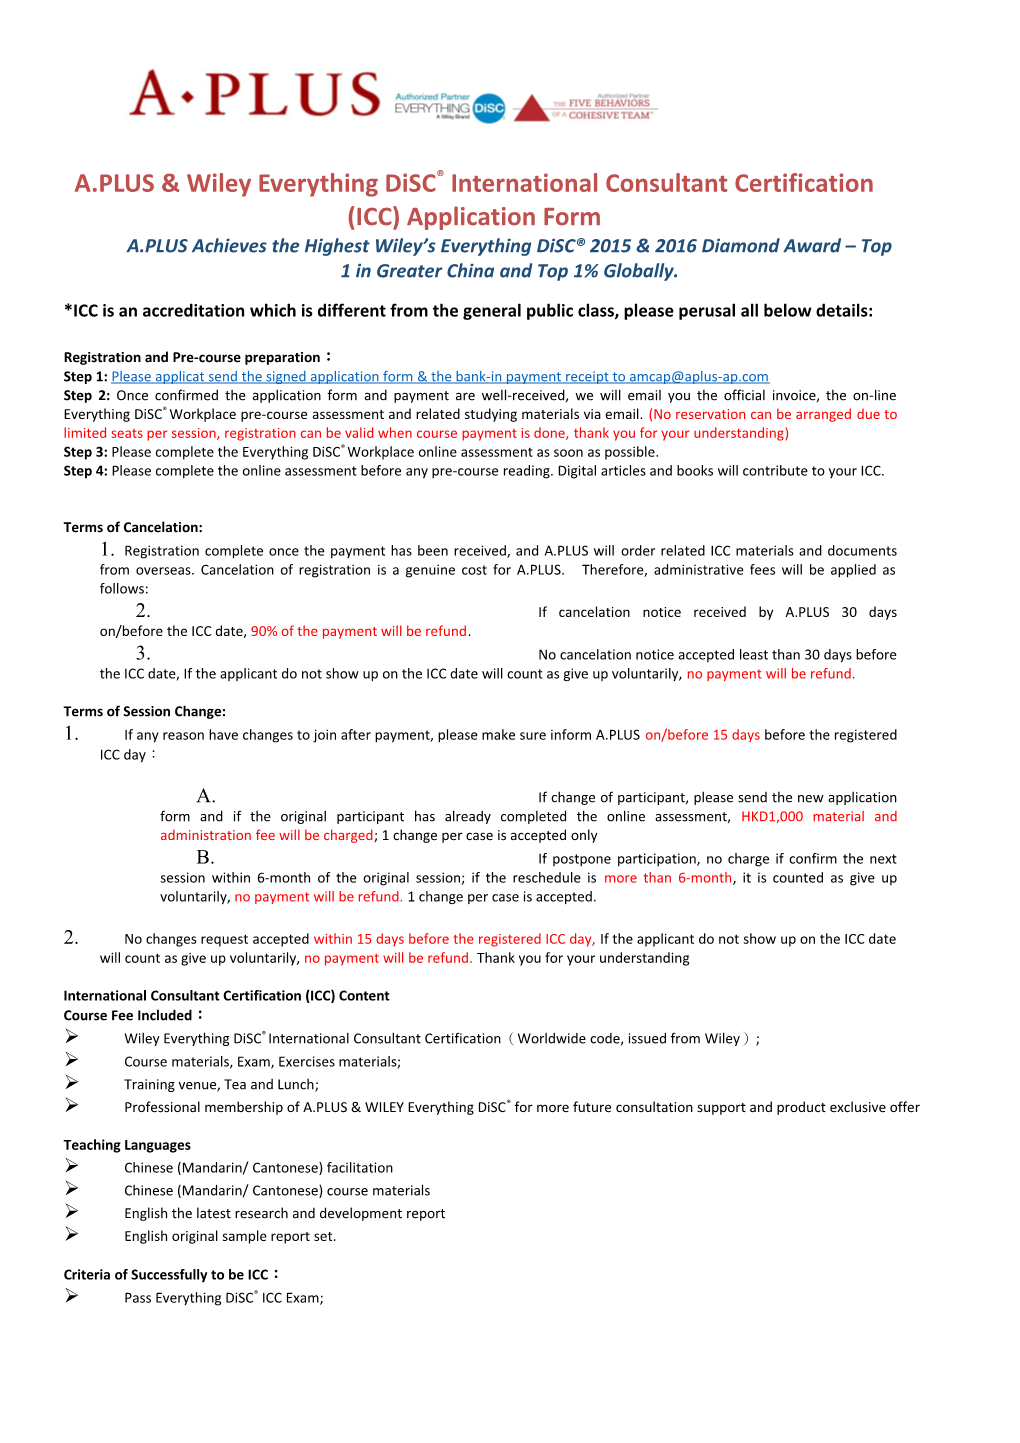 A.PLUS & Wiley Everything Disc International Consultant Certification (ICC) Application Form